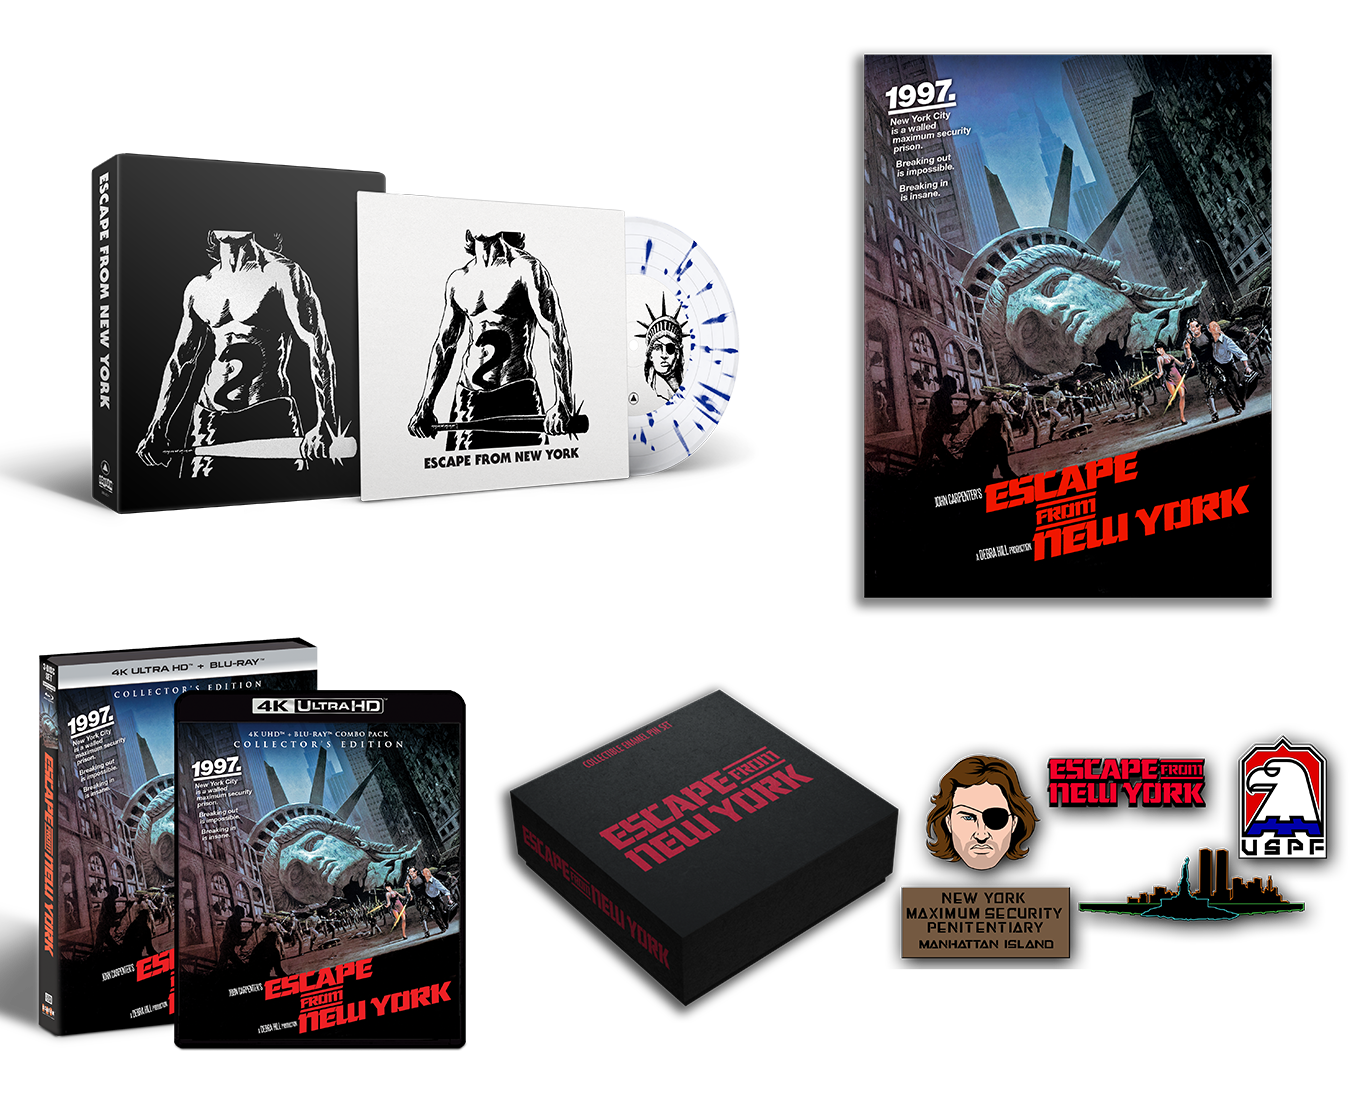 Escape From New York [Collector's Edition] + Vinyl + Enamel Pin Set + Poster - Shout! Factory